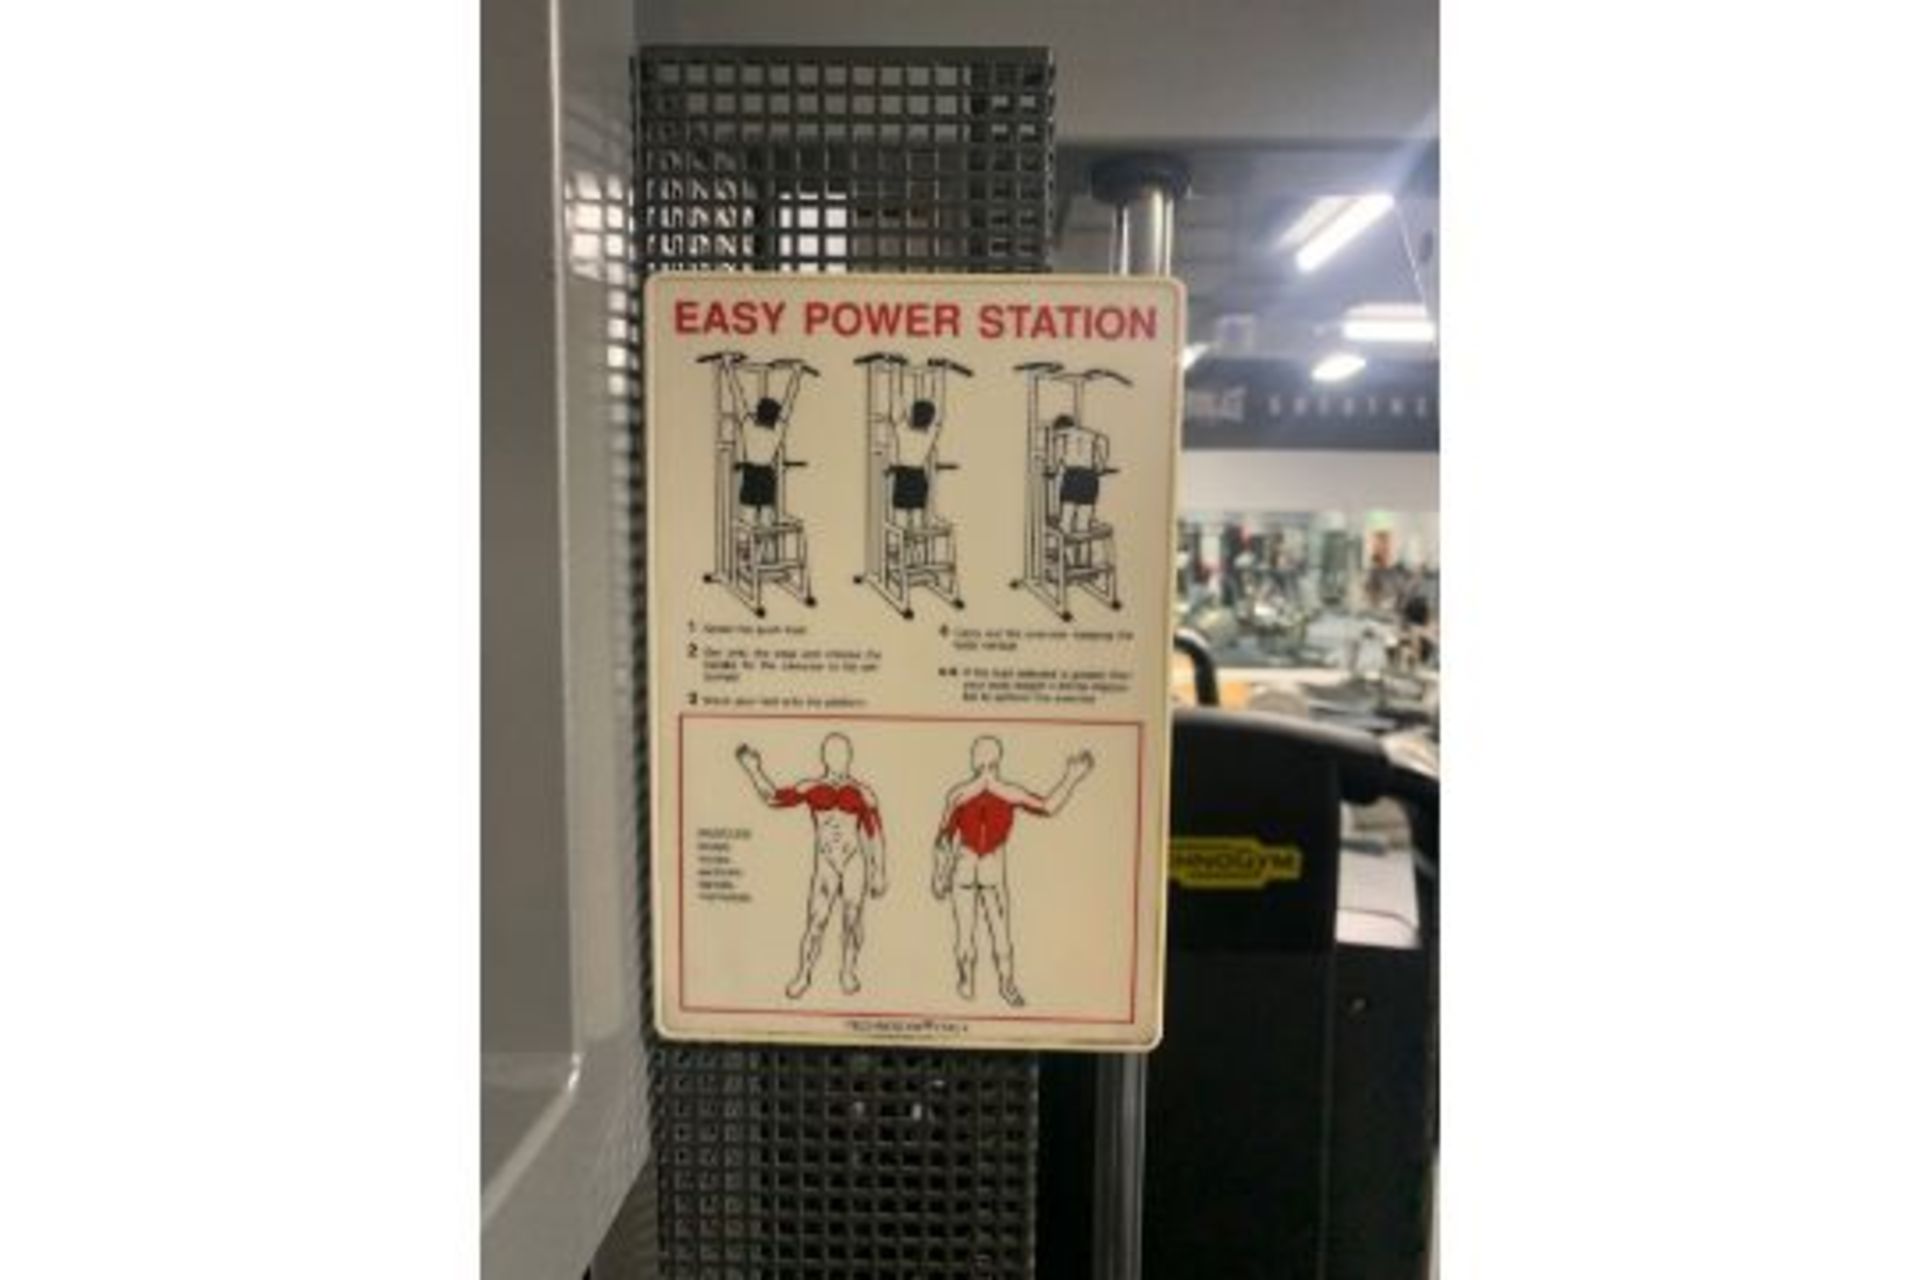 Easy Power Station - Image 2 of 5